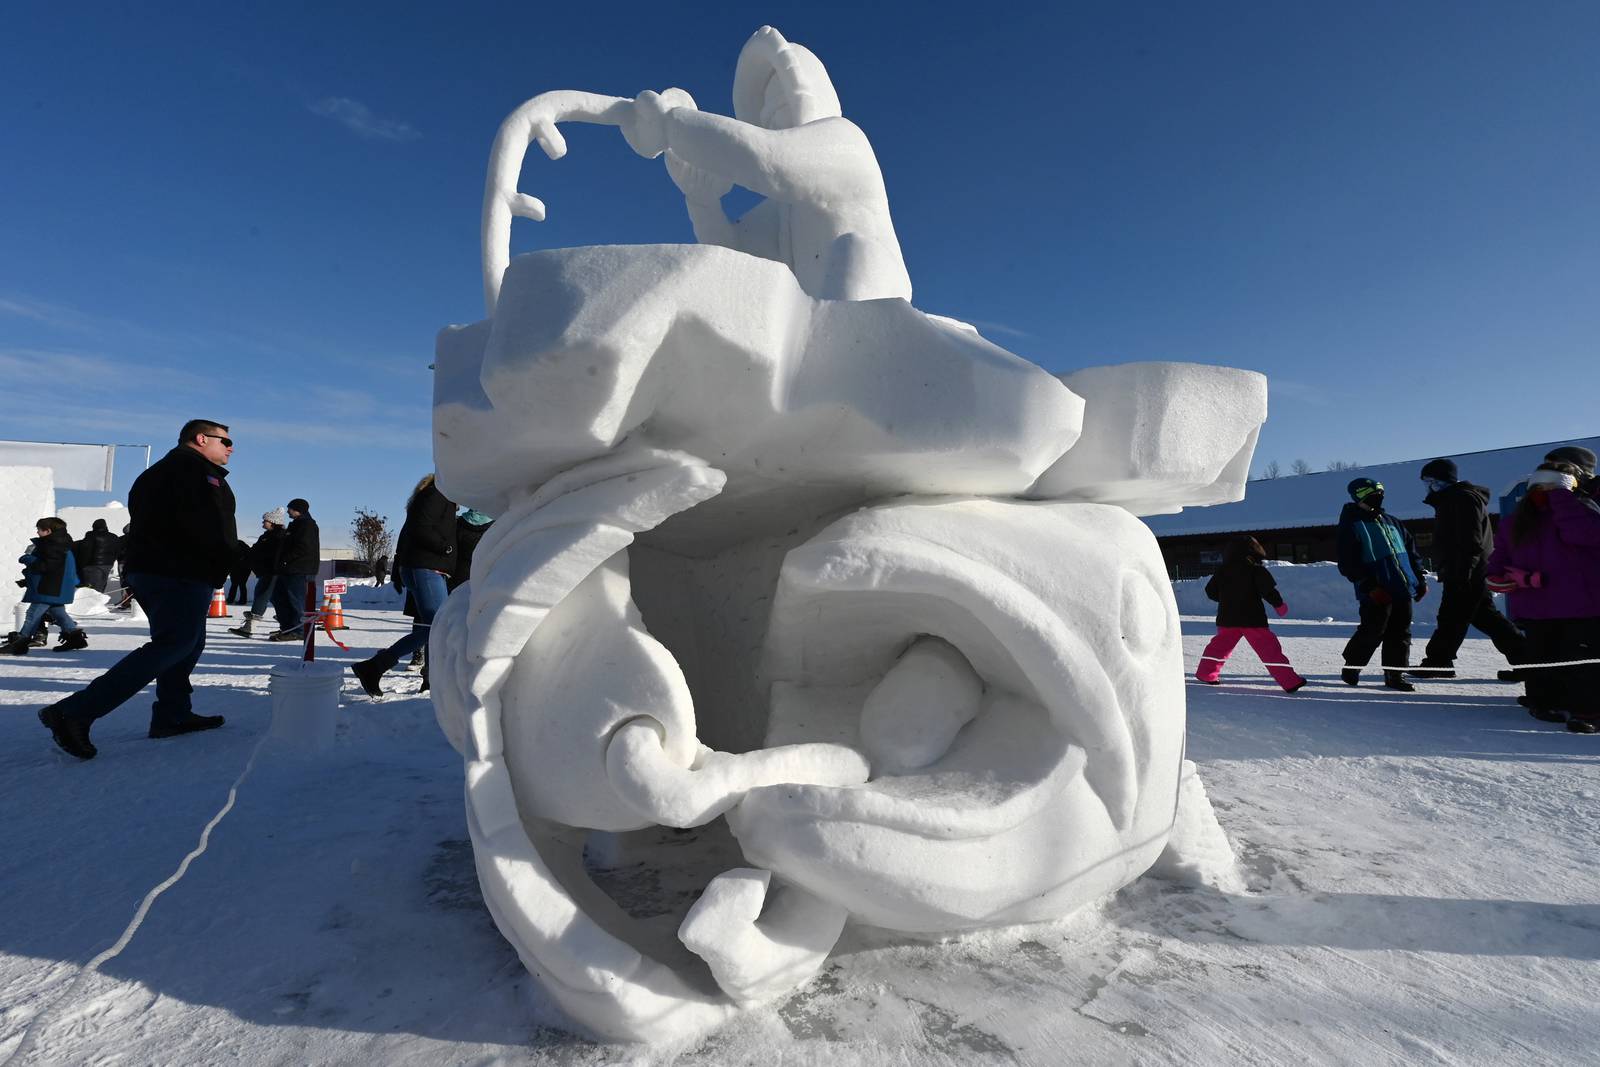 Anchorage Fur Rondy snow sculptures capture whimsy and fun of Alaska